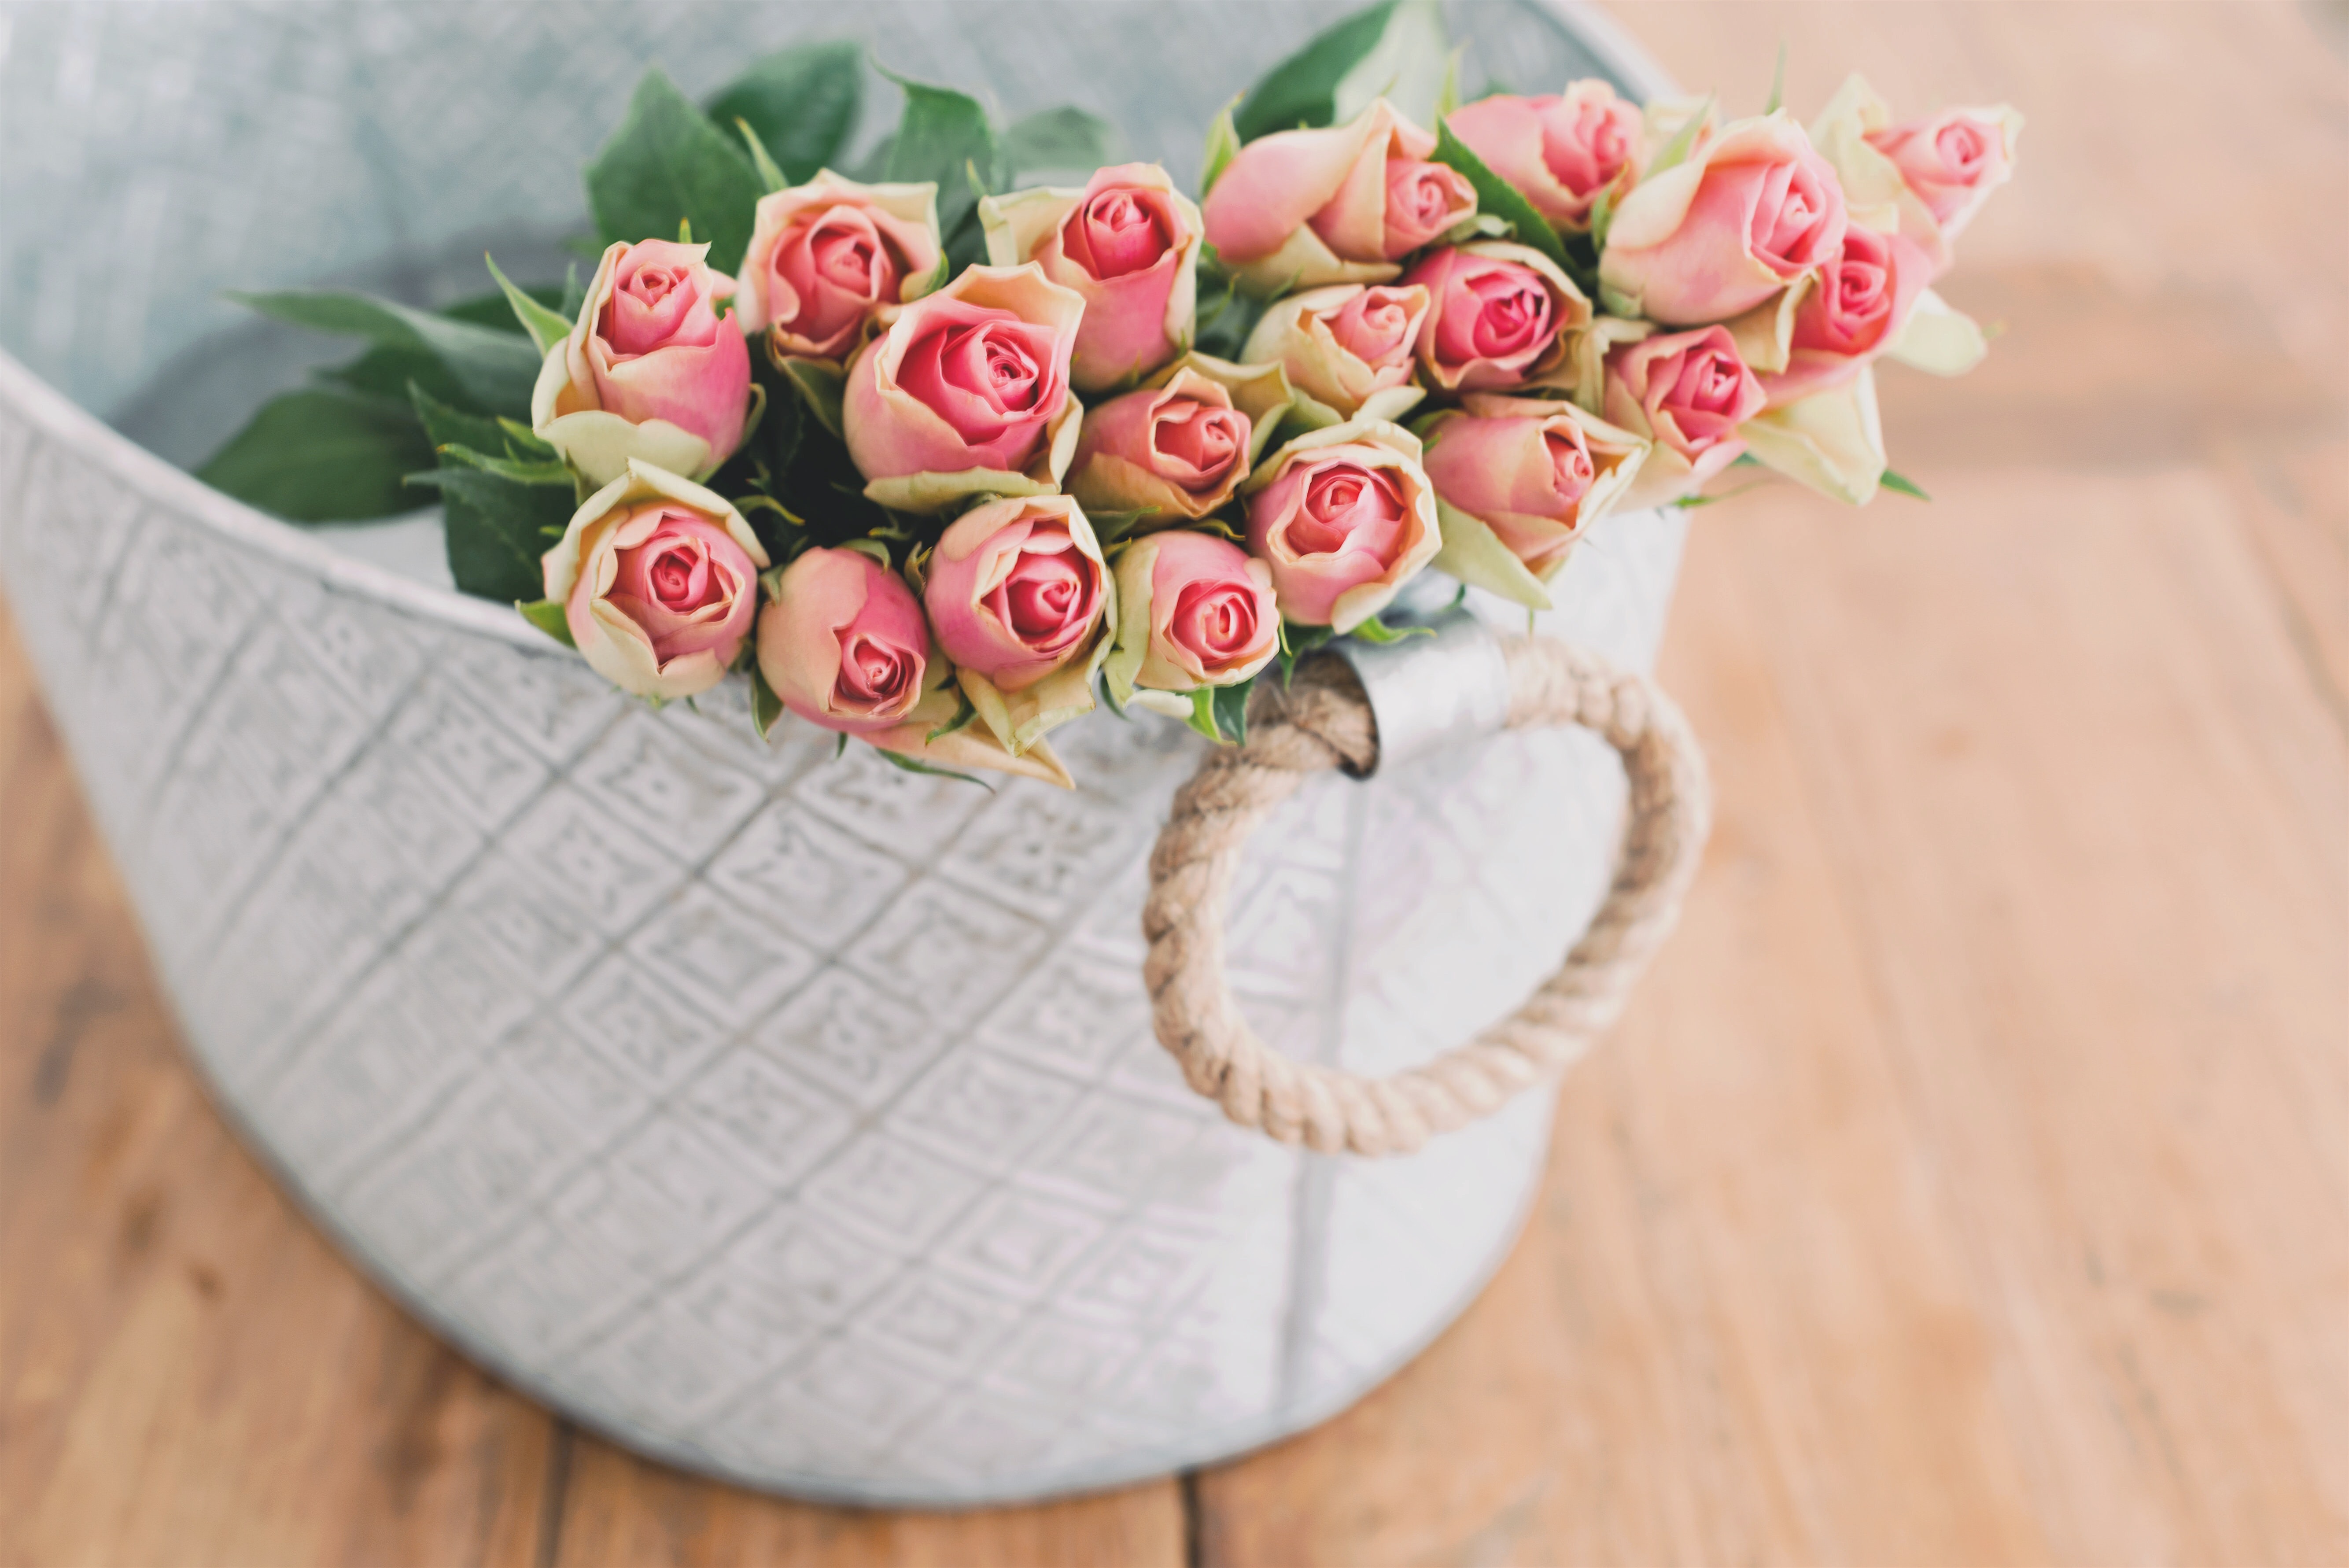 Roses are a classic choice for wedding centerpieces